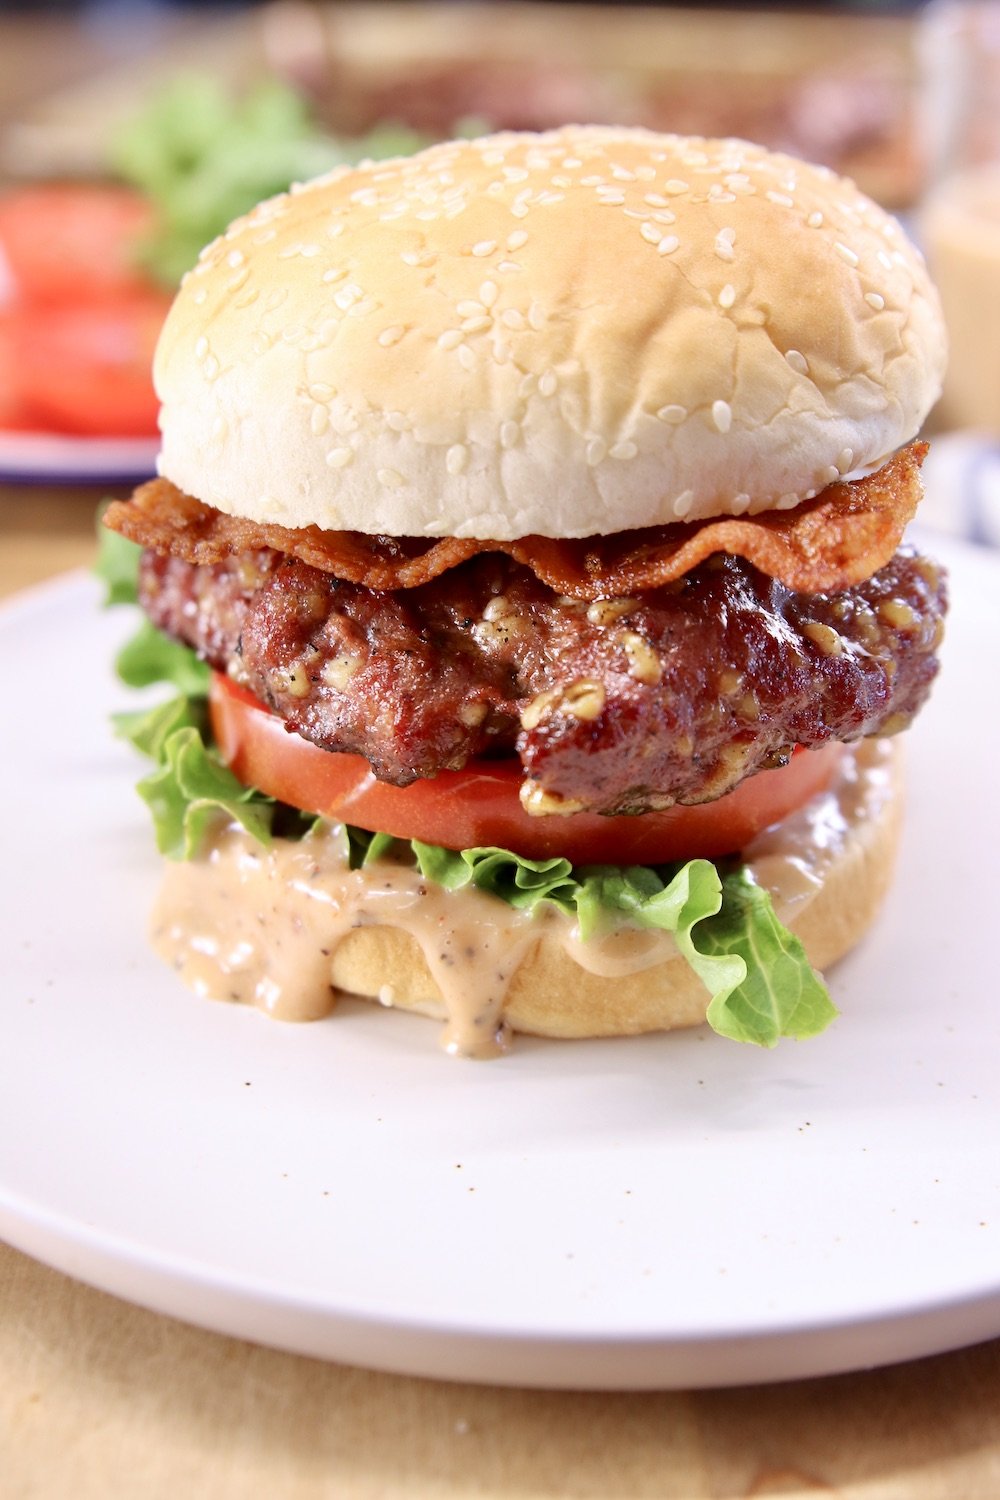 Burger with bacon, lettuce, tomato on a sesame seed bun